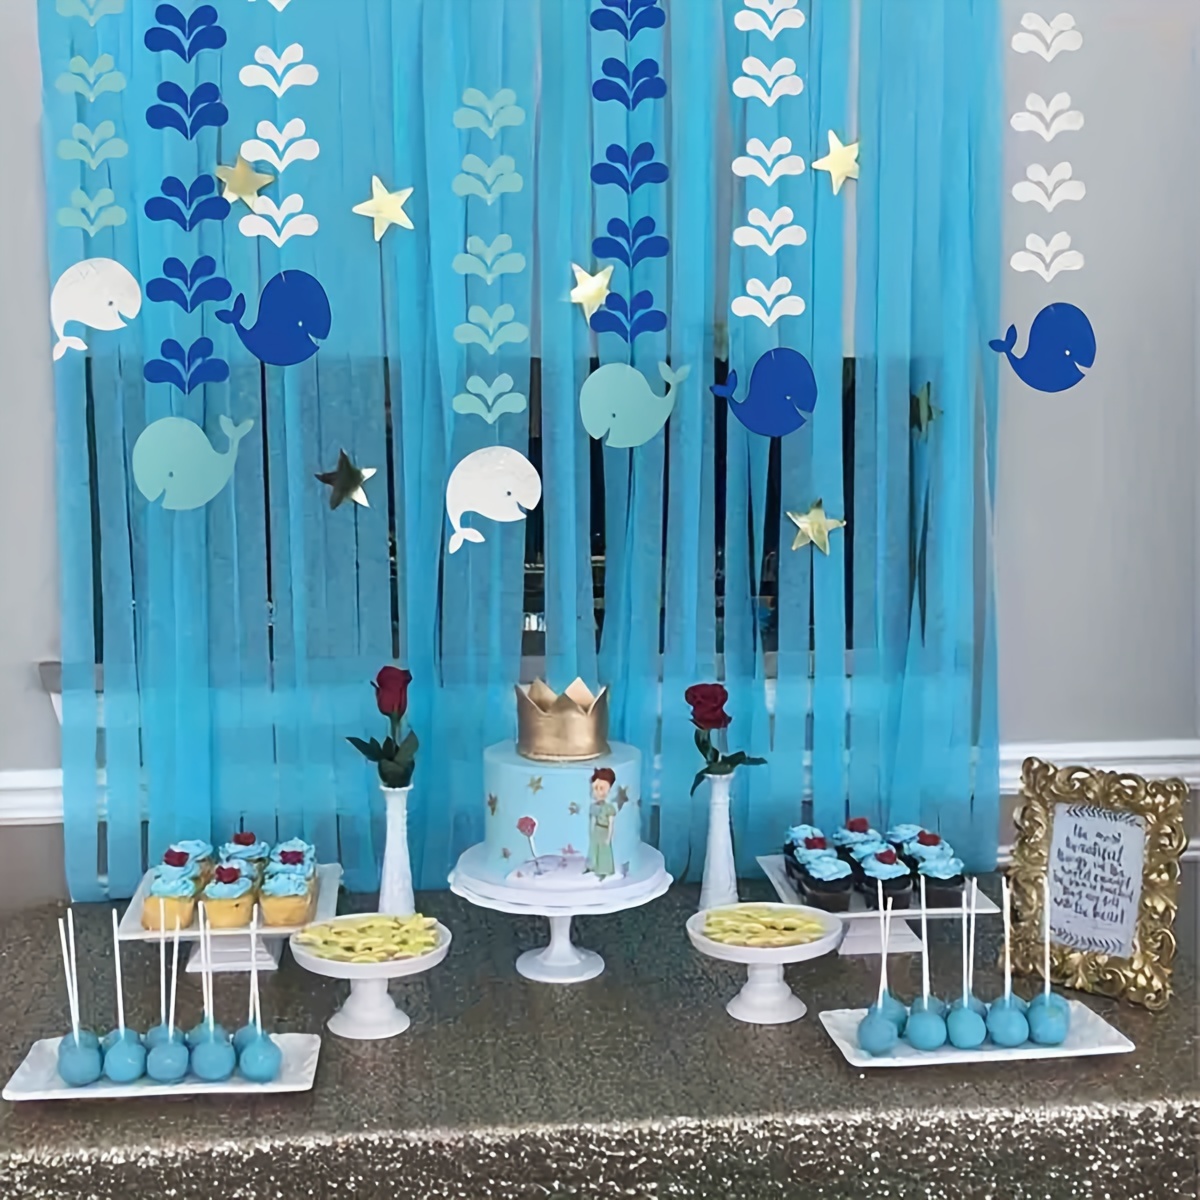 Set, Adorable * Whale Water Splash Hanging Decorations For An Ocean-themed  Classroom Birthday Party Decoration Setup